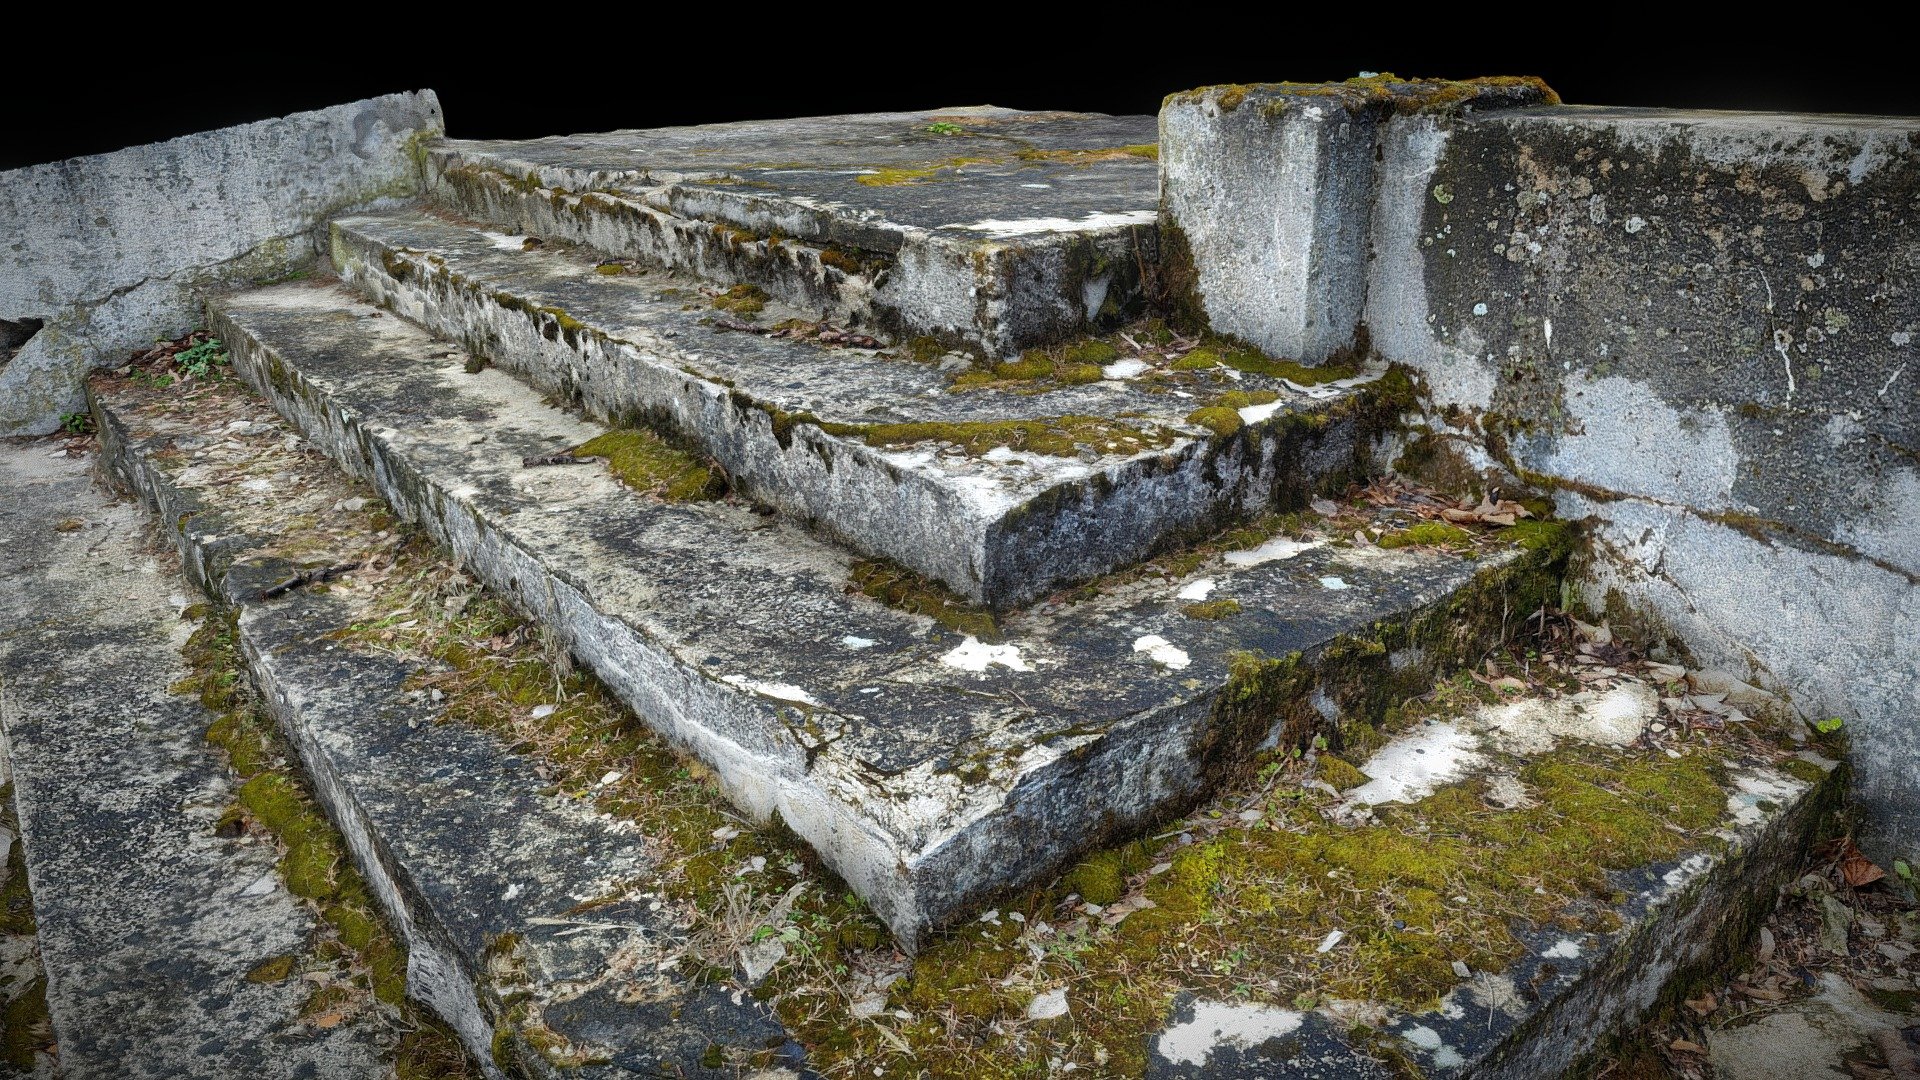 My 3D reconstruction generated with photogrammetry software 3DF Zephyr v6.505 processing 146 images - Stary Folwark, Moss Stair, Details - Download Free 3D model by zhenkoest (@zhenko) 3d model